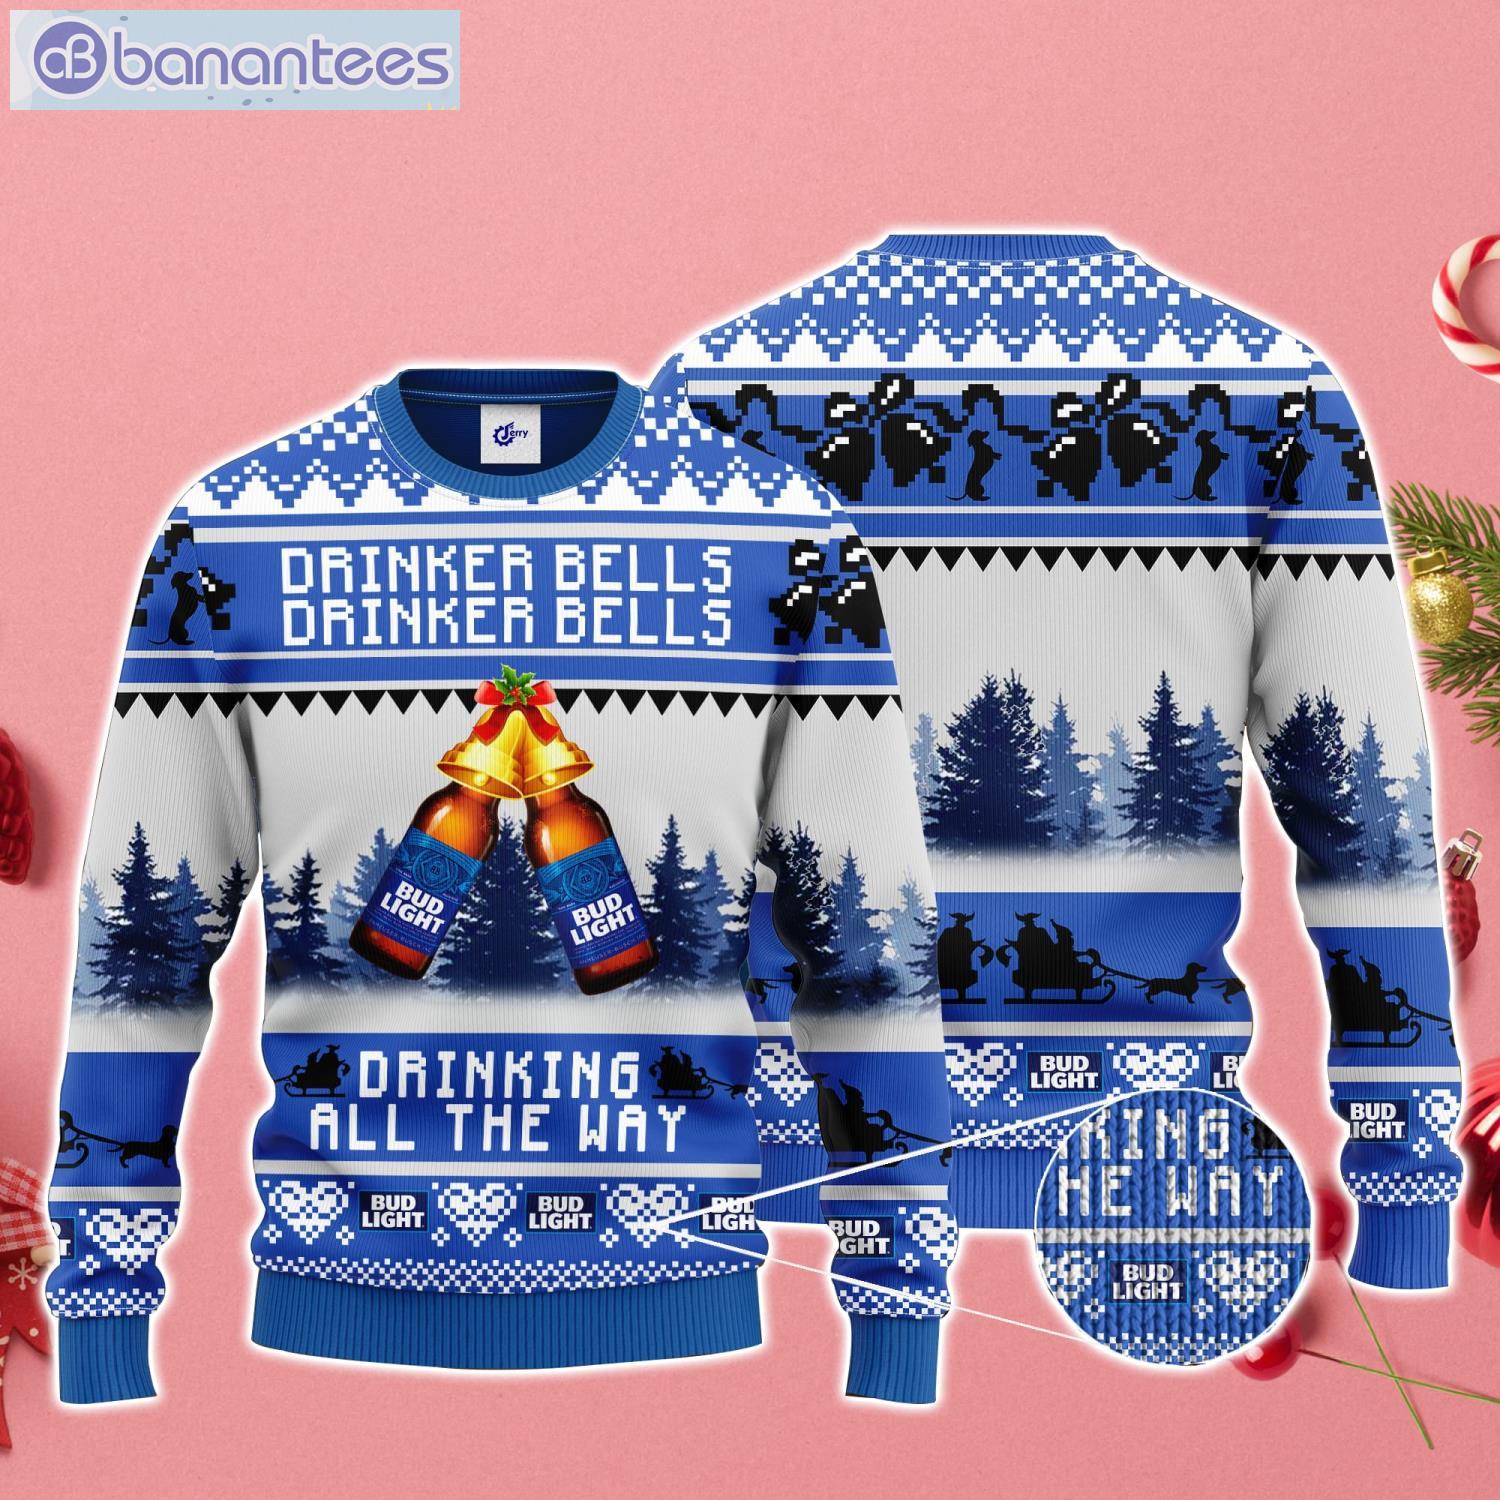 Bud Light Drinker Bells Drinker Bells Drinking All The Way Ugly Christmas Sweater Product Photo 1